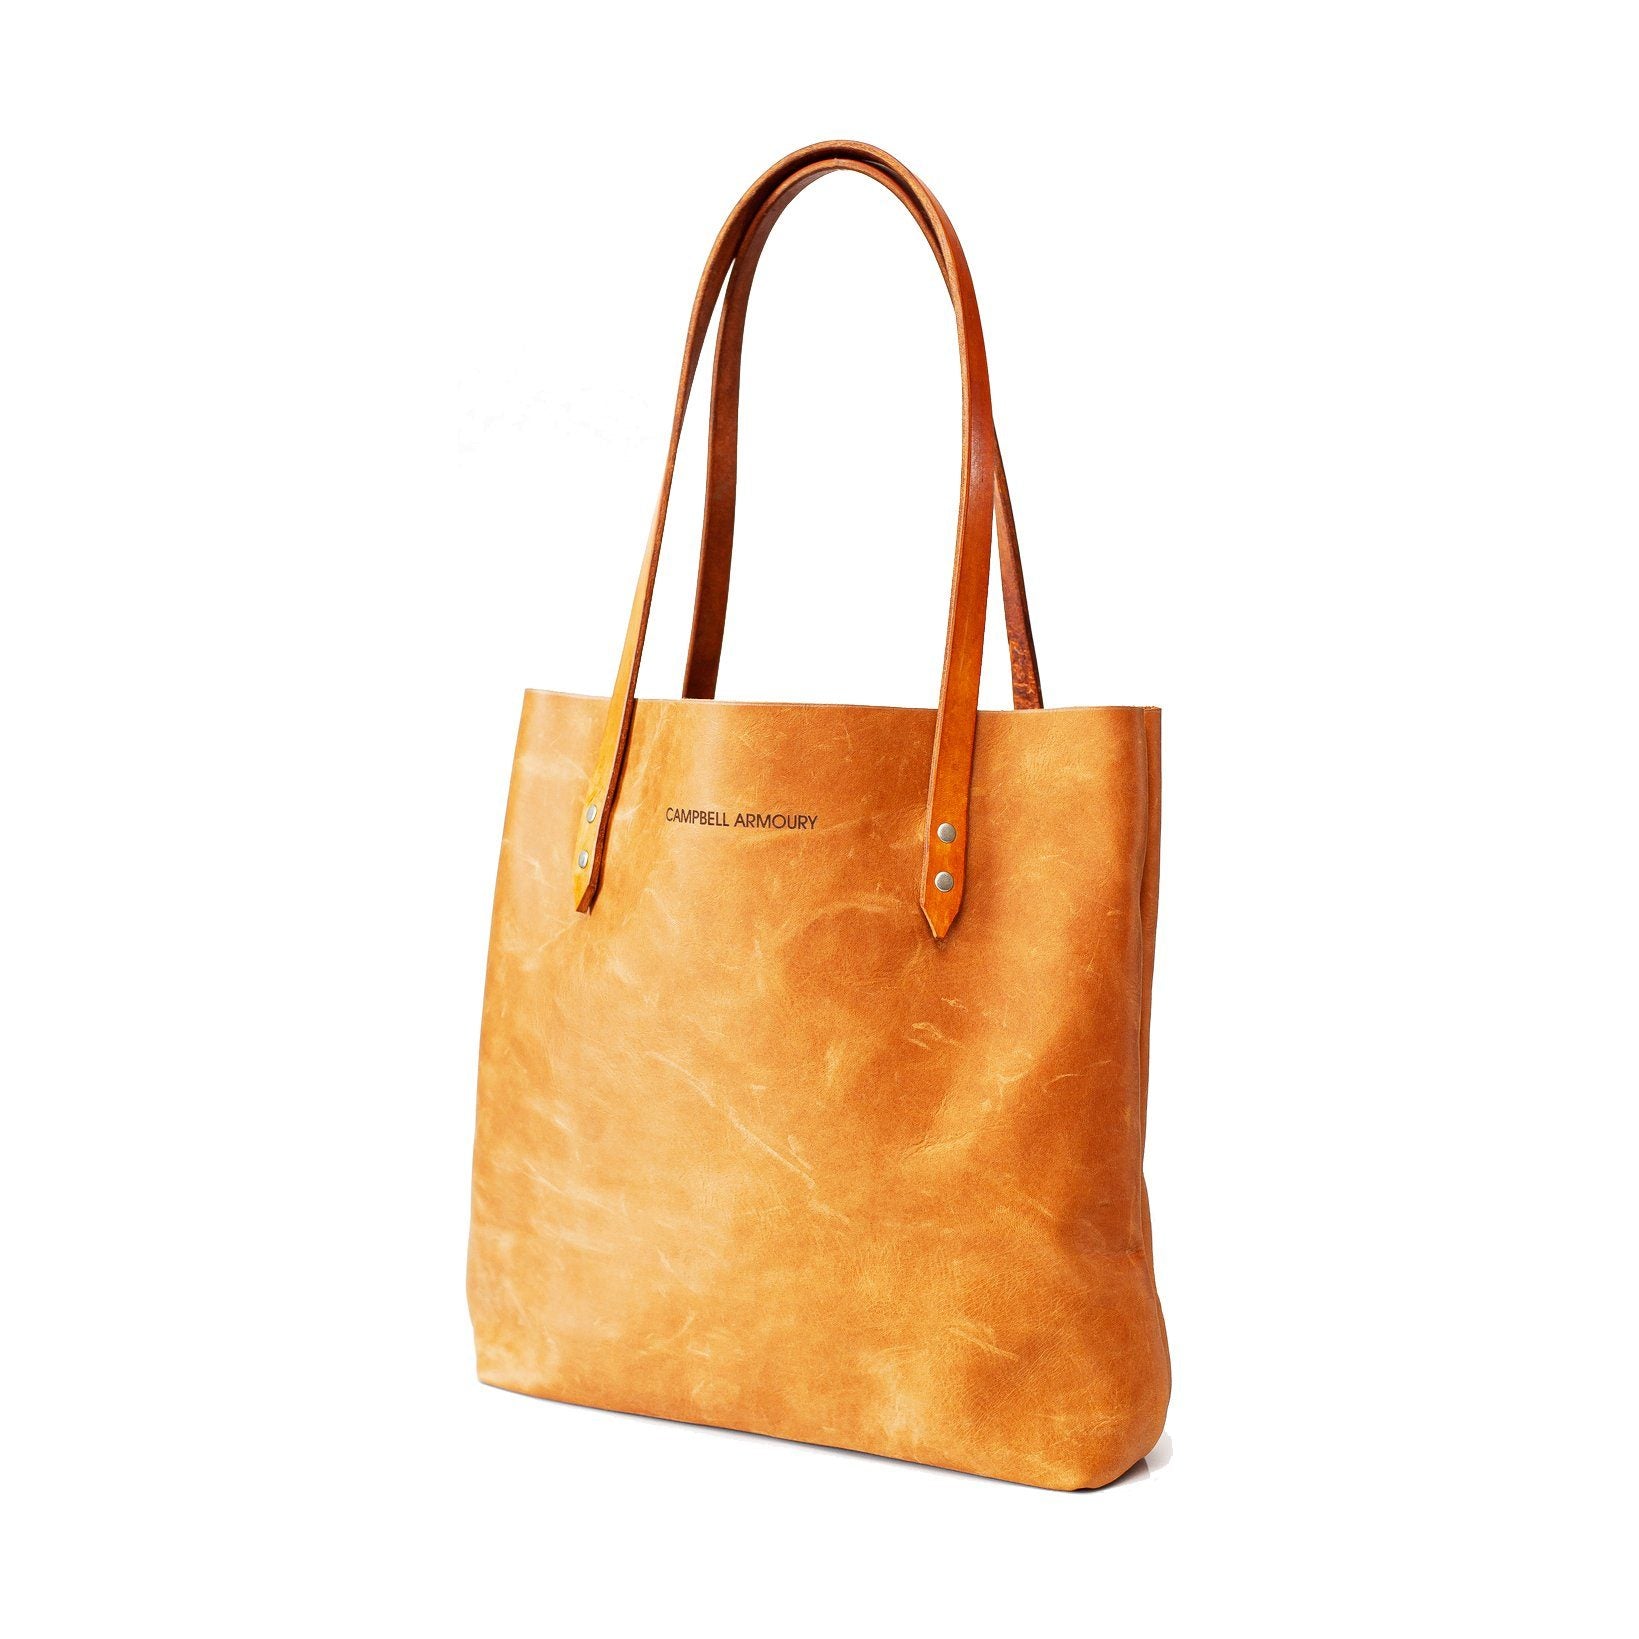 Campbell Armoury Leather Soft Tote Bag clothing & accessories Campbell Armoury tan